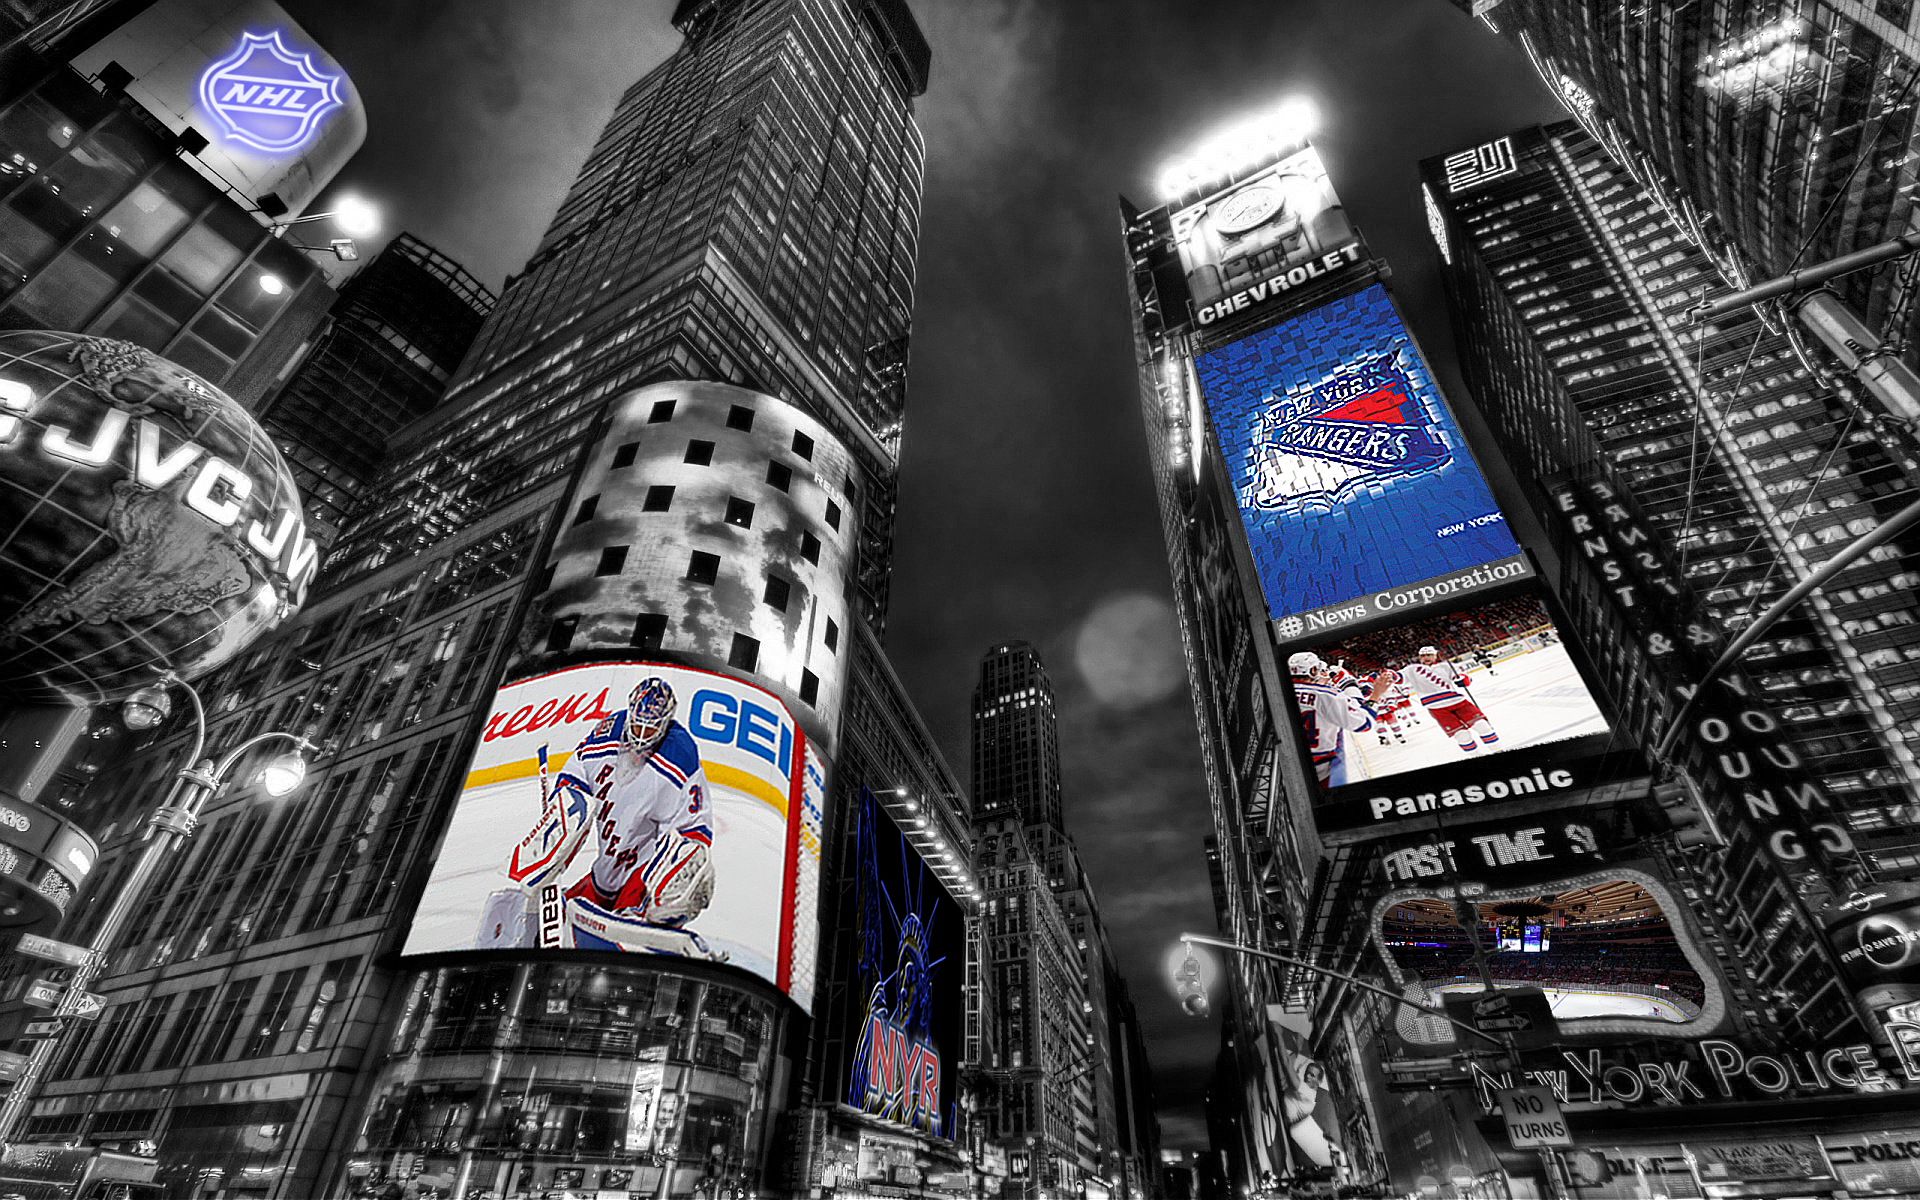 NHL New York Rangers Times Square Wallpaper by Realyze on deviantART 1920x1200